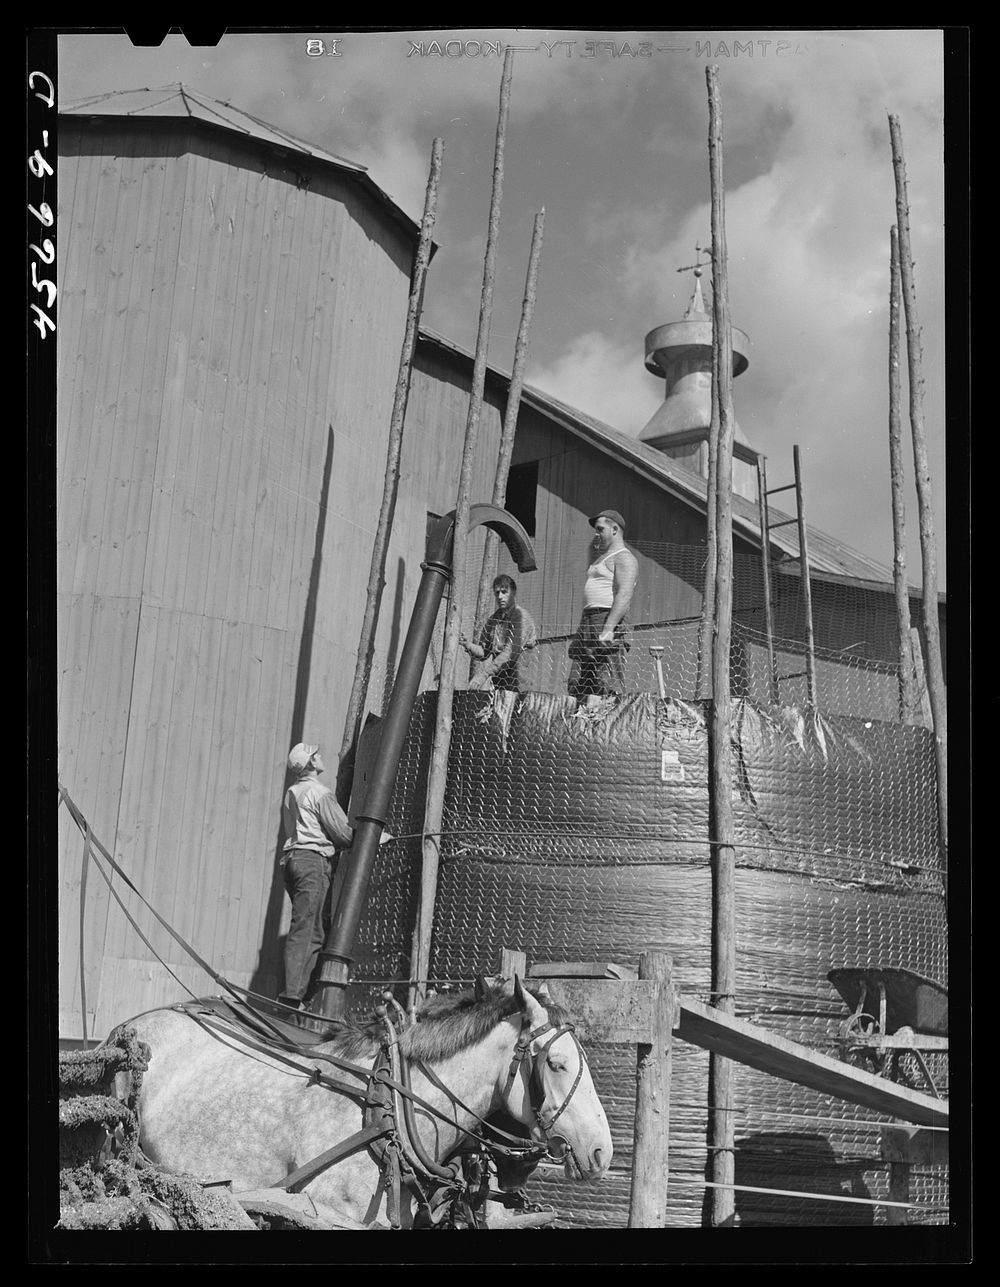 Building a temporary silo near Saint Albans, Vermont. Sourced from the Library of Congress.